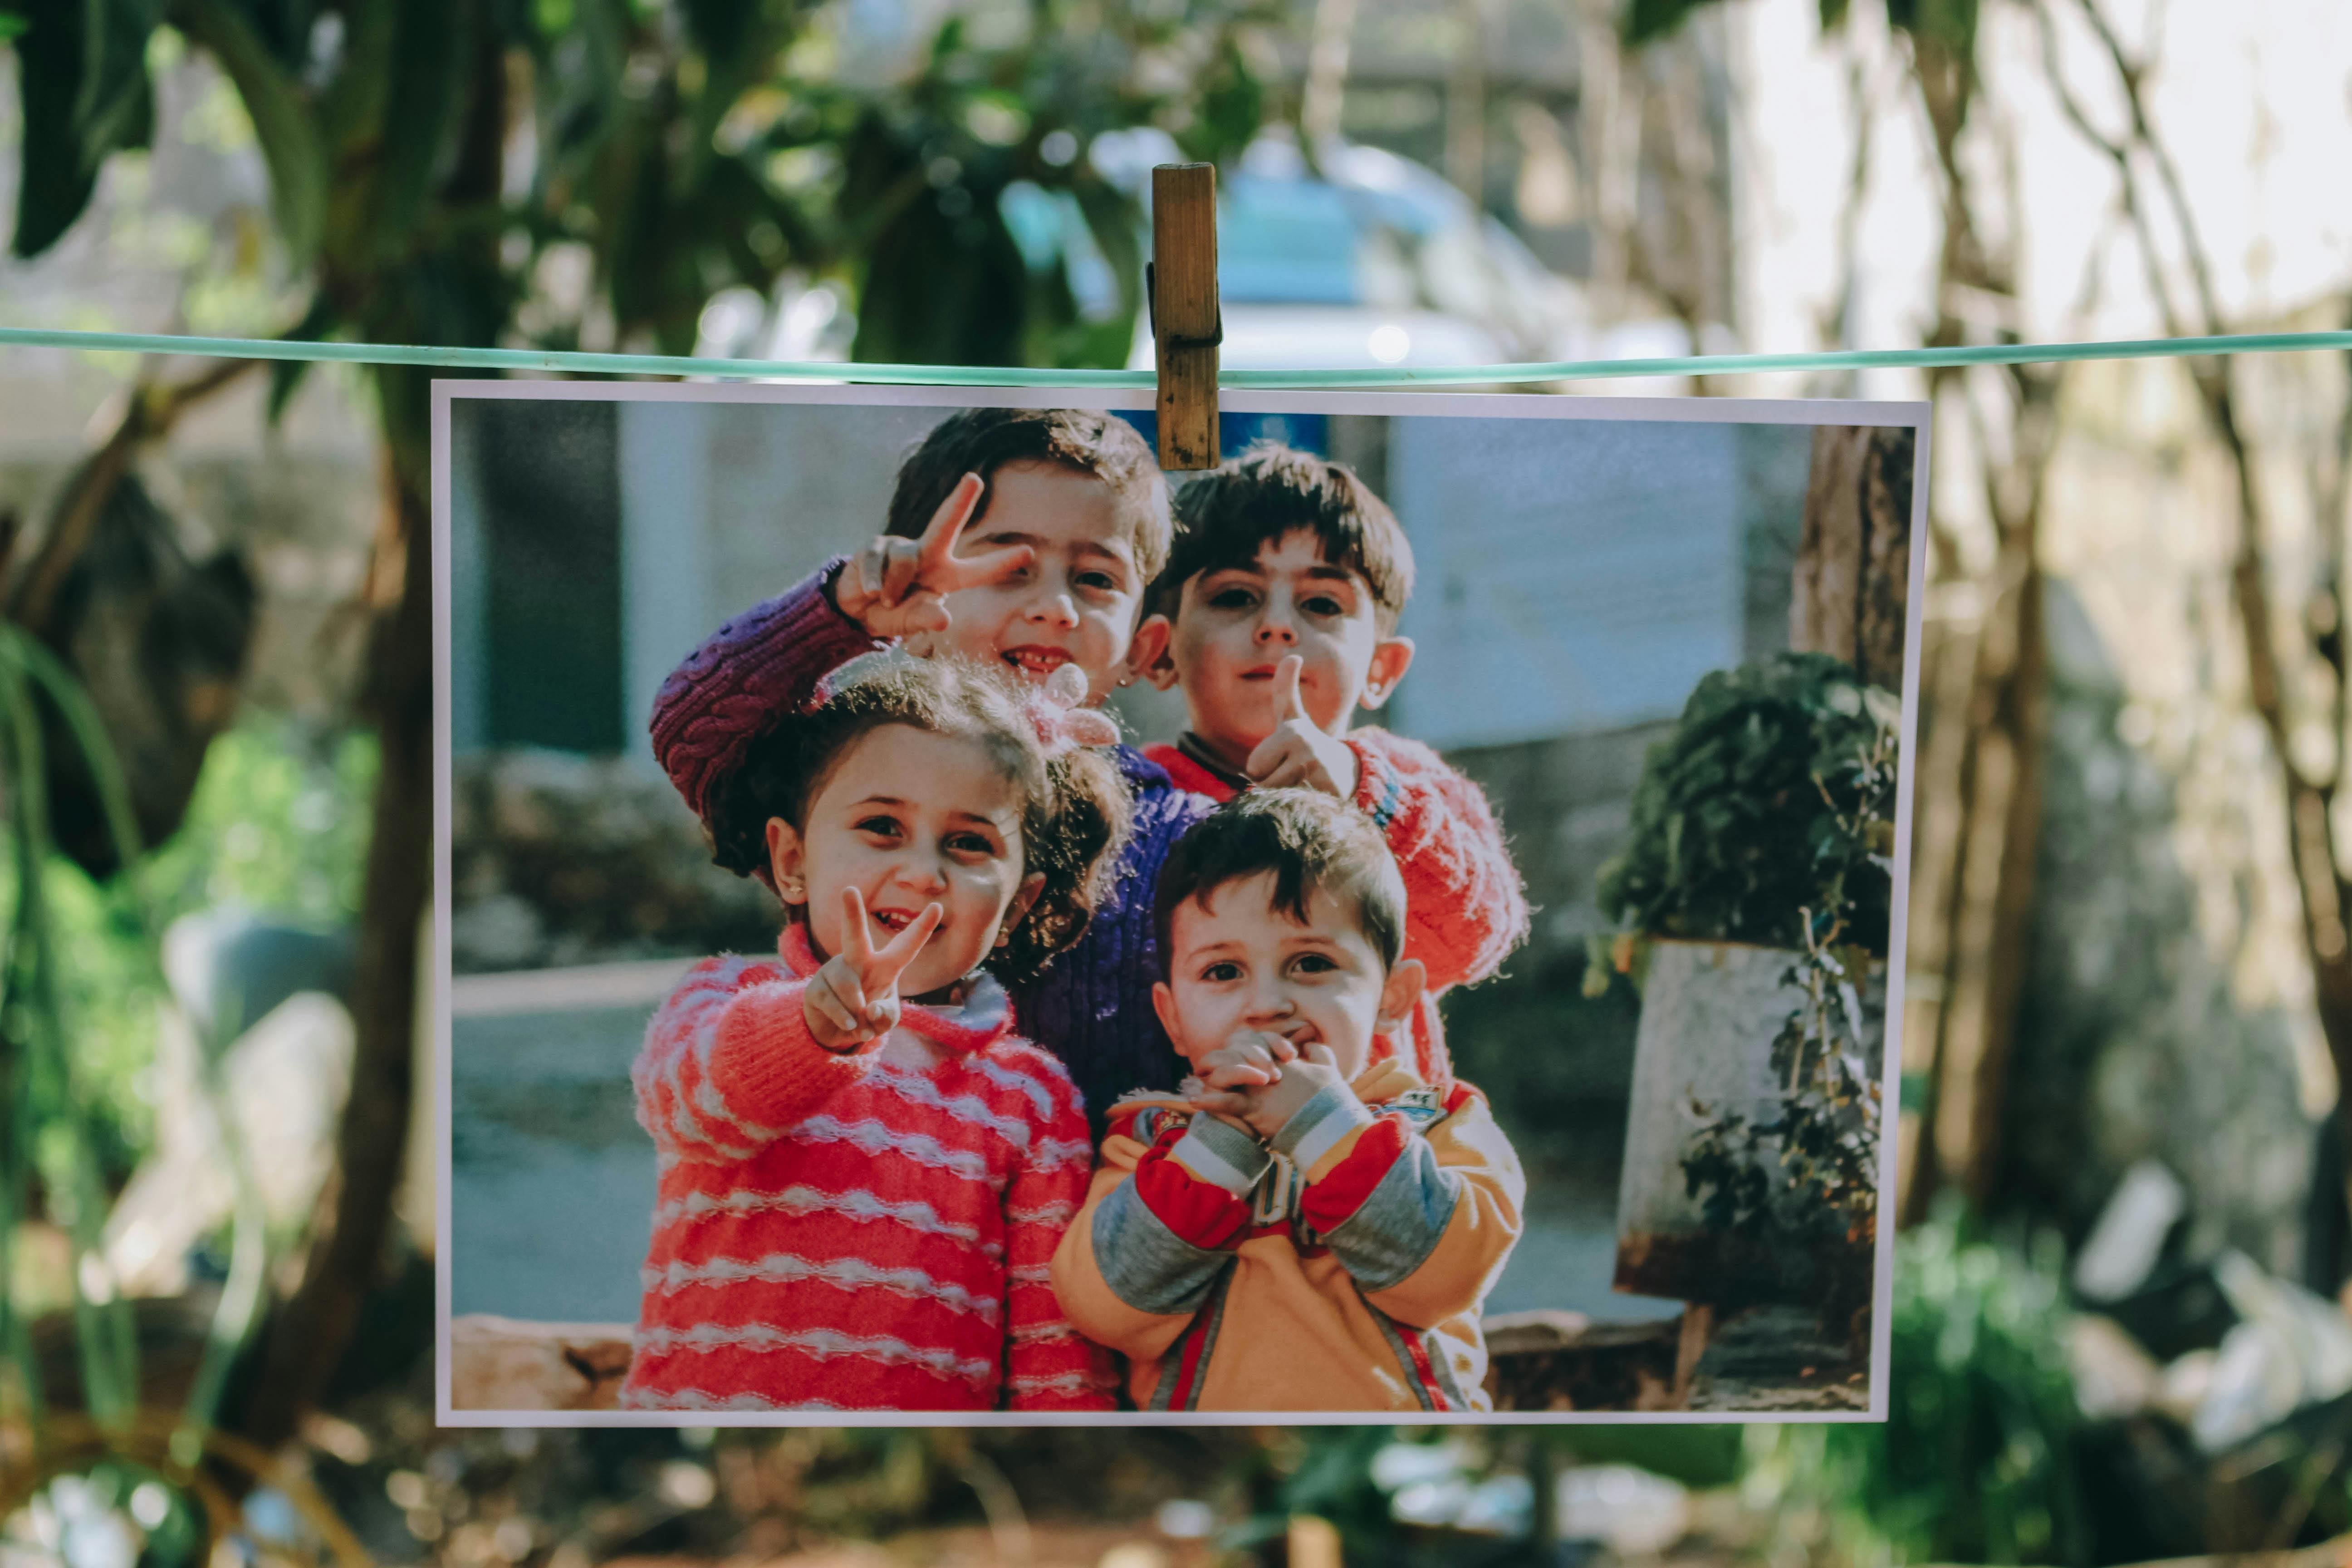 A picture of siblings together | Source: Pexels